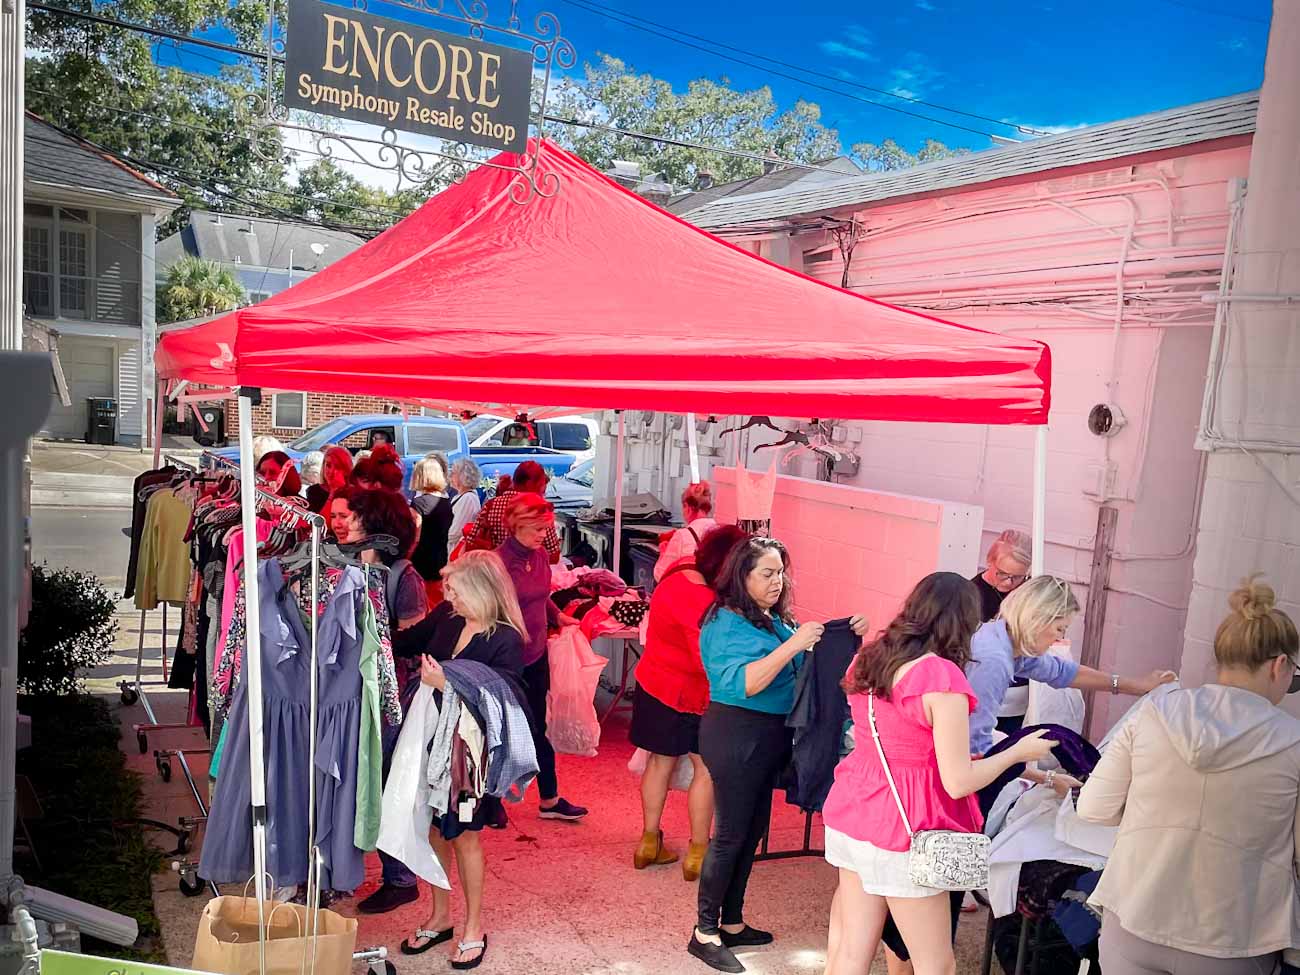 Record setting bag sale at the Encore Shop